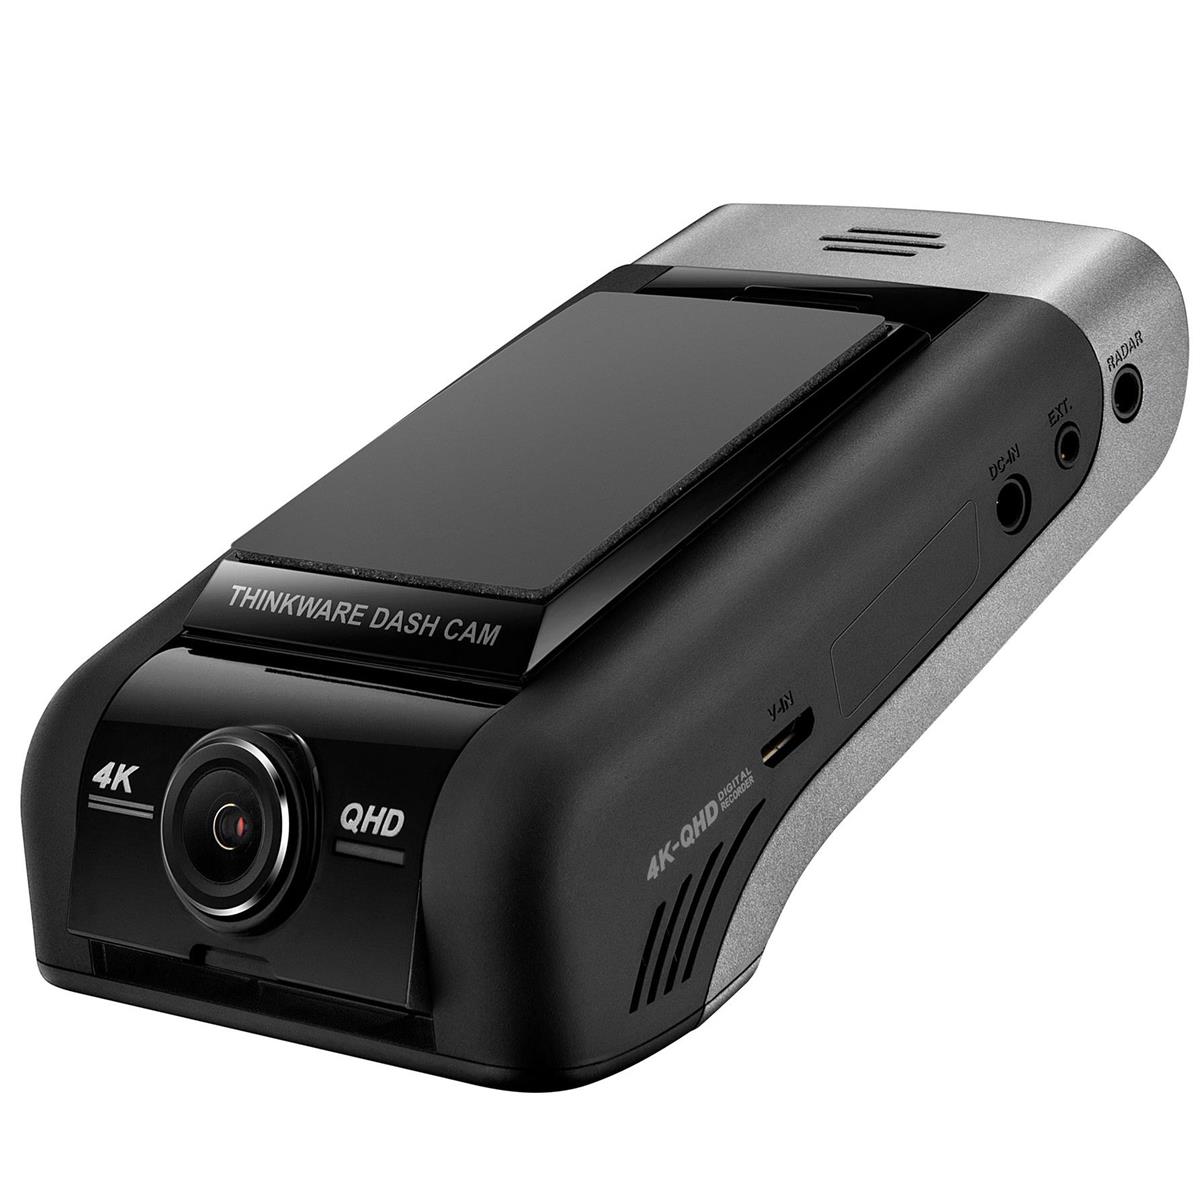 Image of Thinkware U1000 4K UHD Dash Camera with Built-in Wi-Fi and ADAS